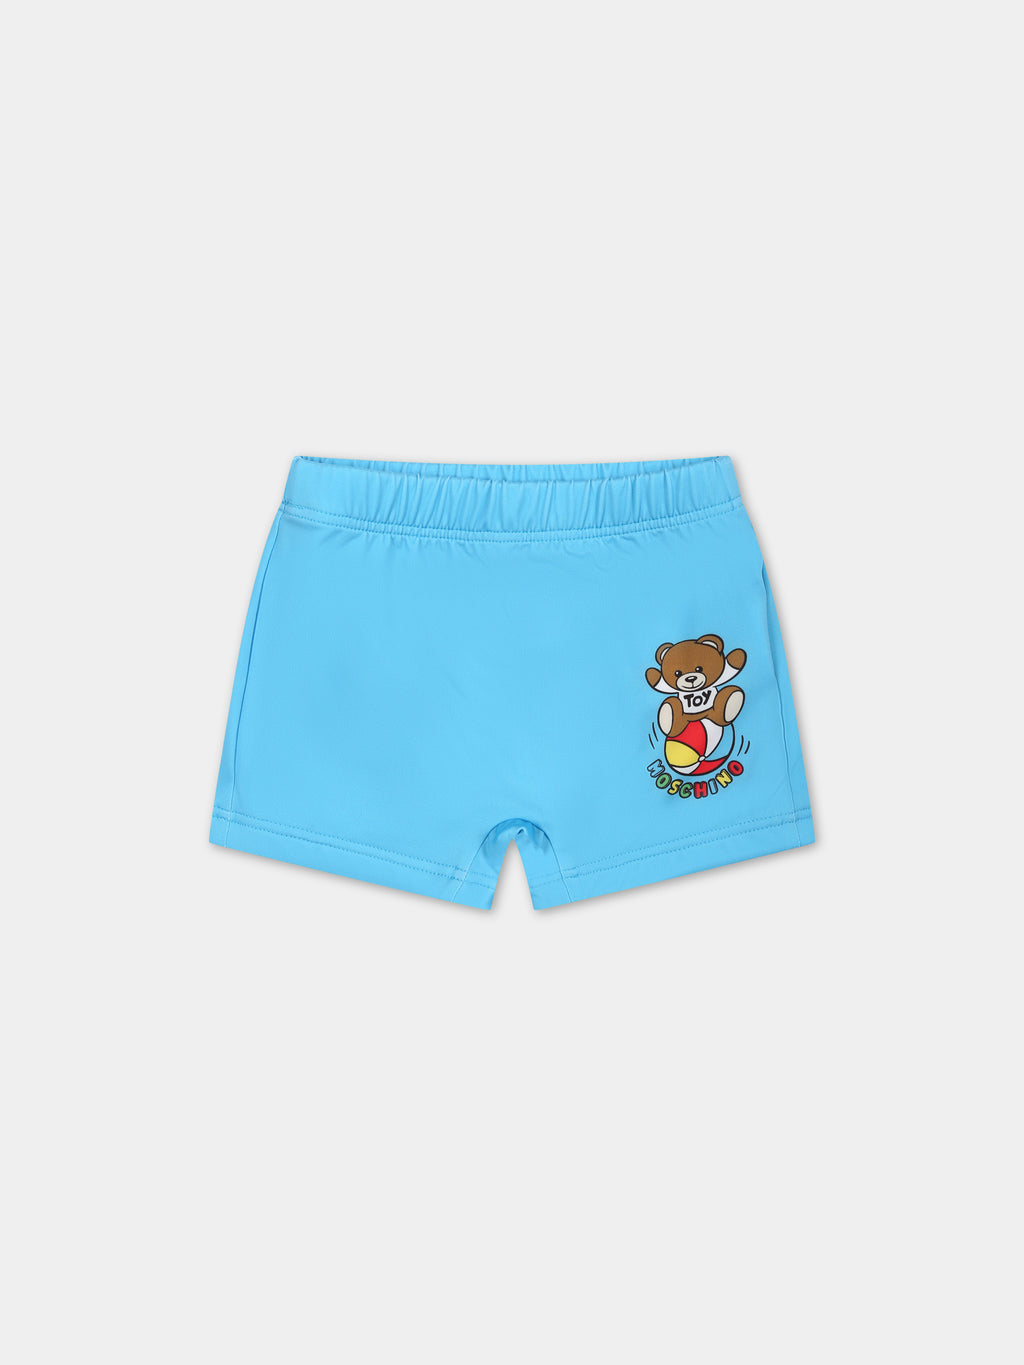 Light blue swimsuit for baby boy with Teddy bear and multicolor logo